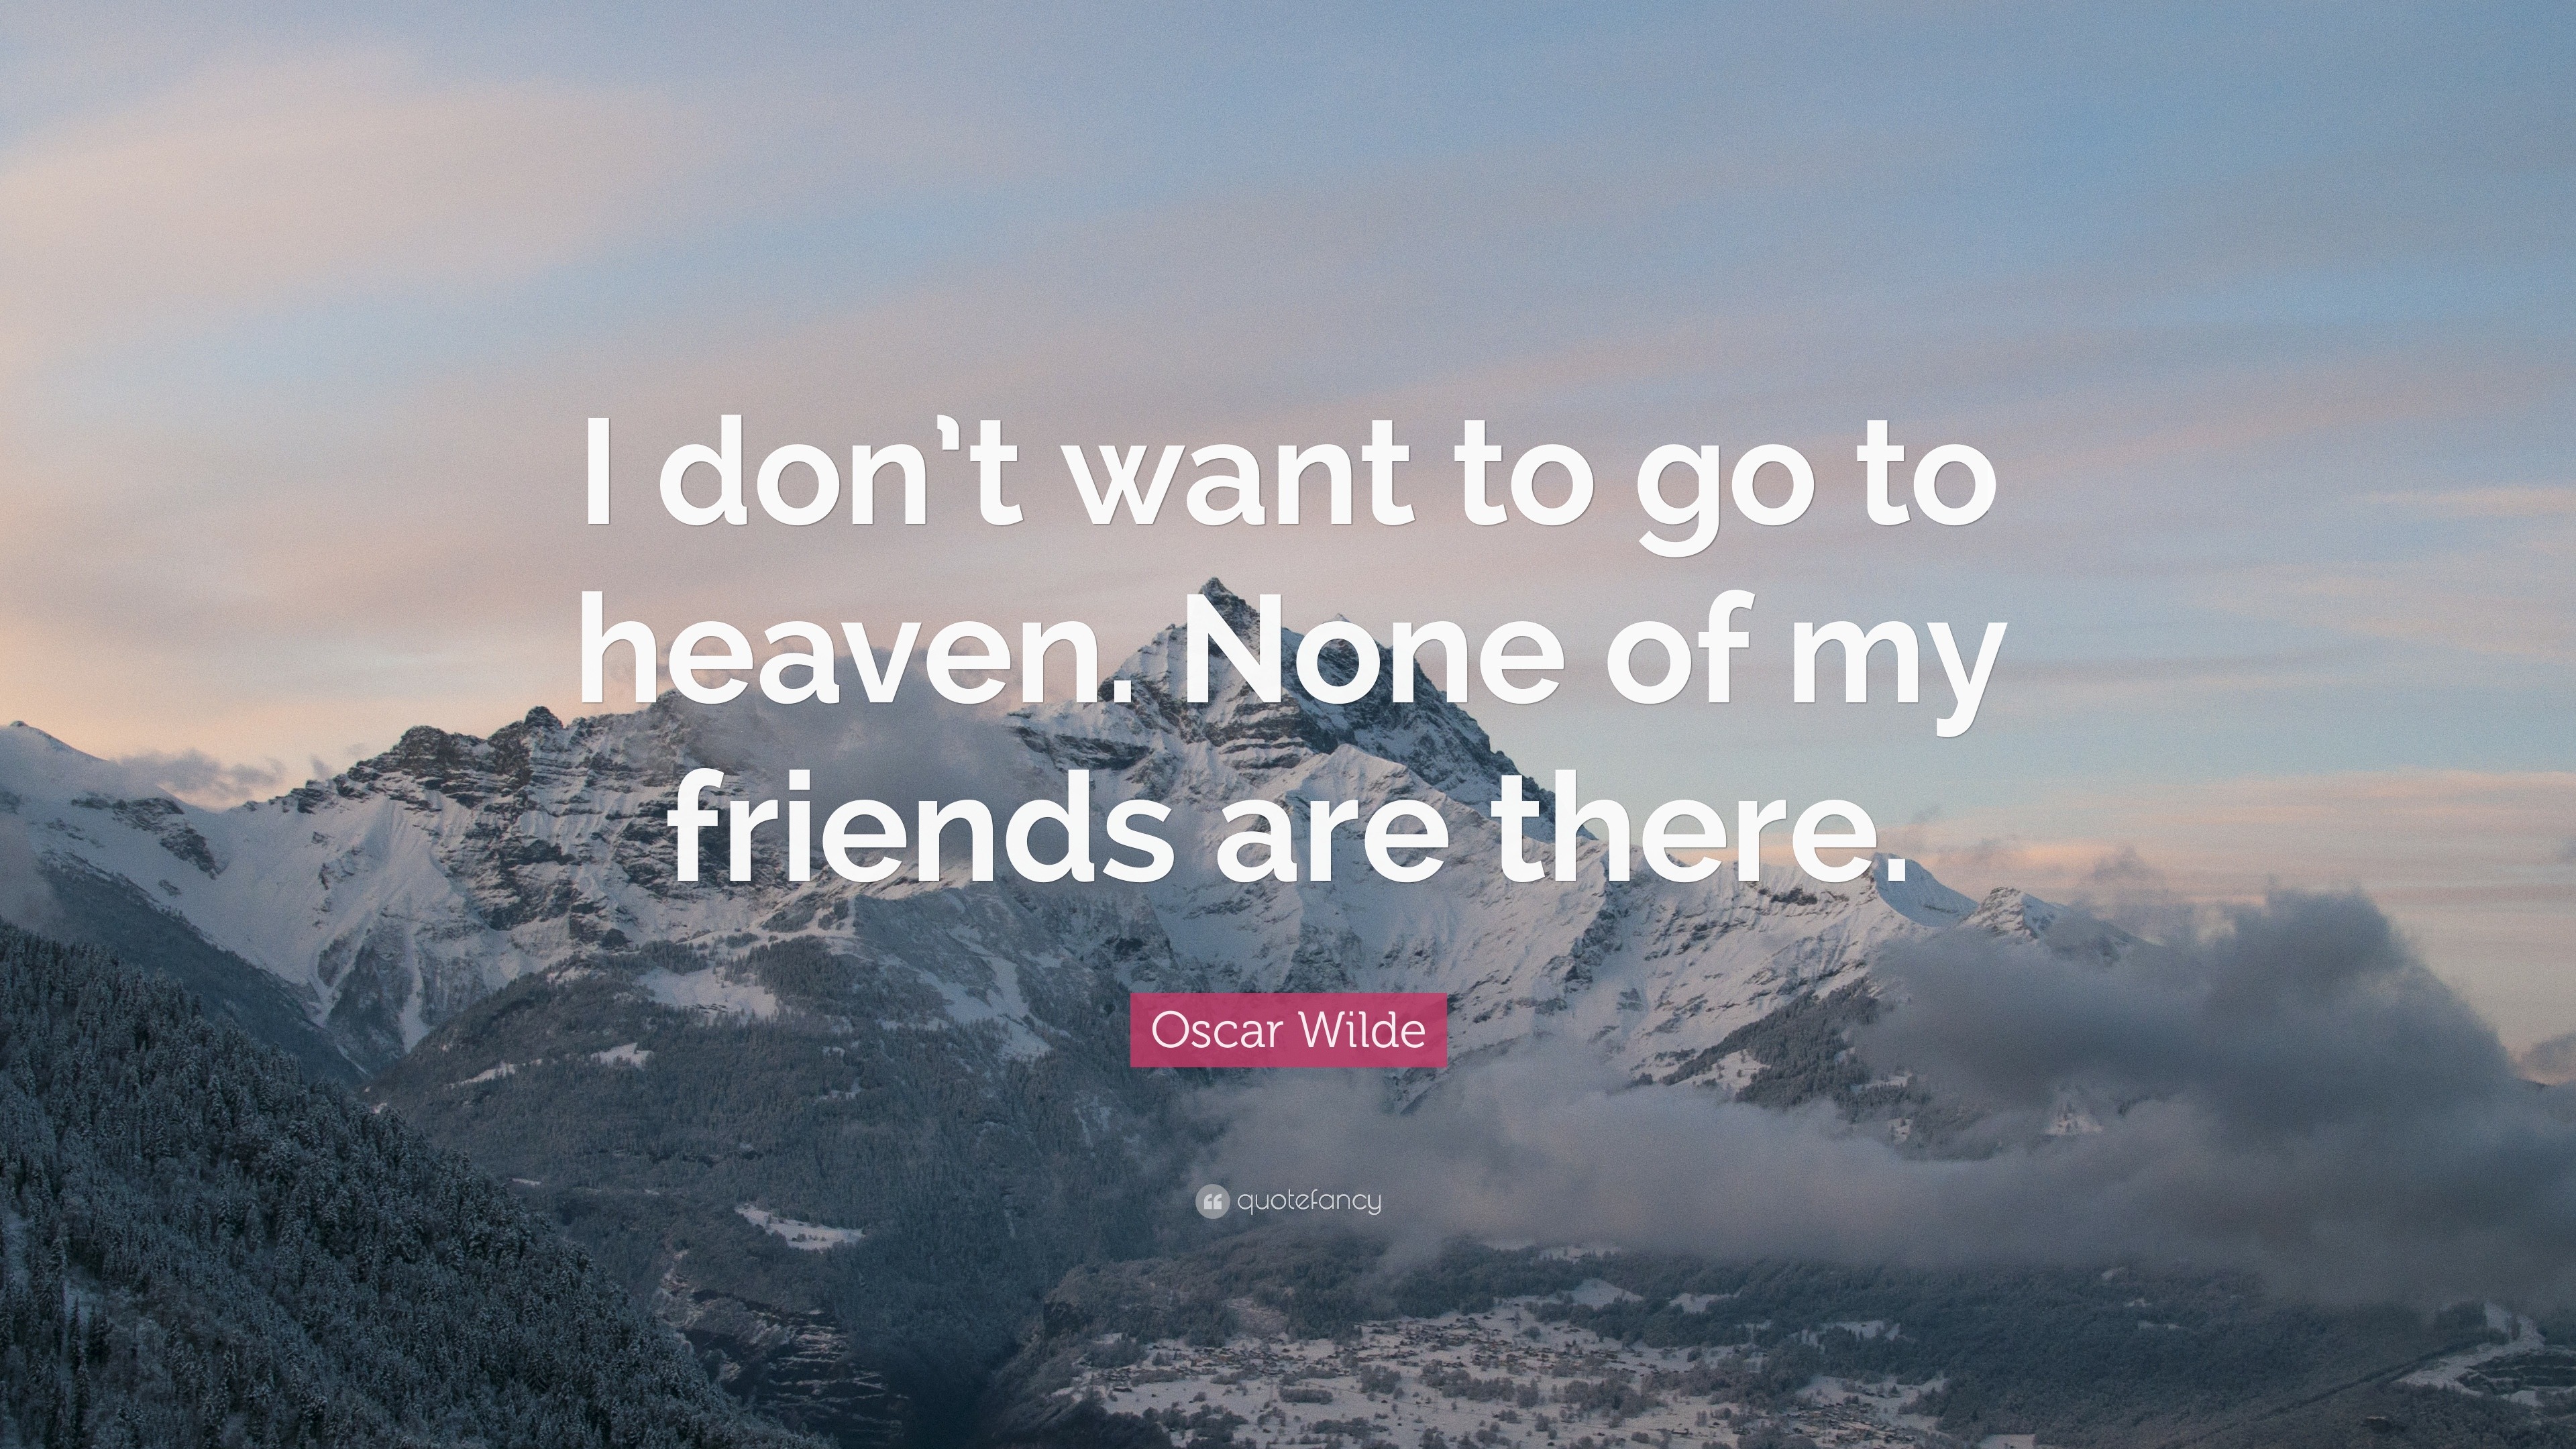 25671 Oscar Wilde Quote I don t want to go to heaven None of my friends